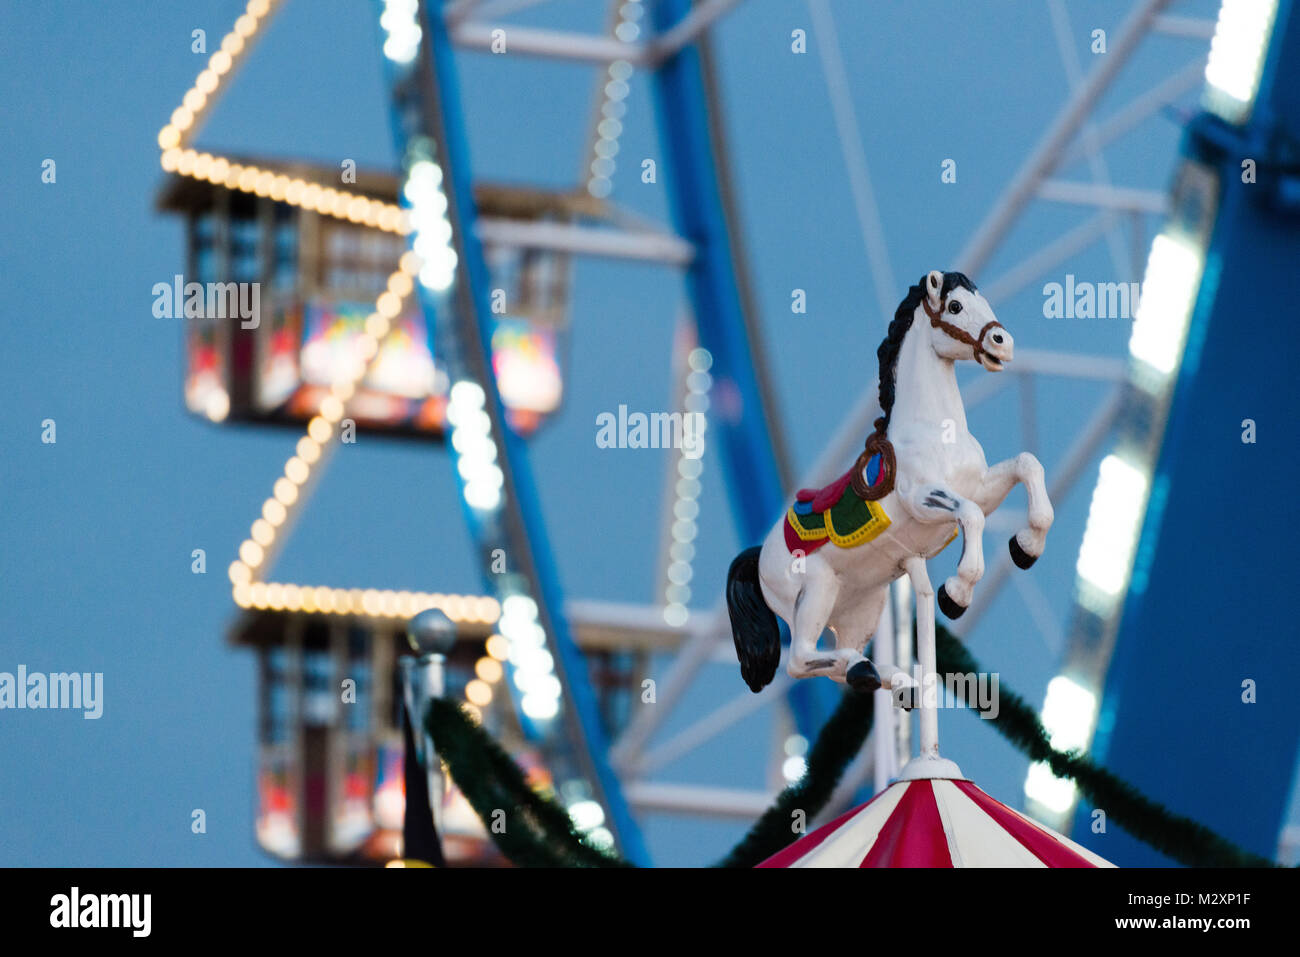 Big wheel and horse, Oktoberfest, 'Wiesn', Munich, blue hour, 'Oide' (old) and new 'Wiesn' Stock Photo